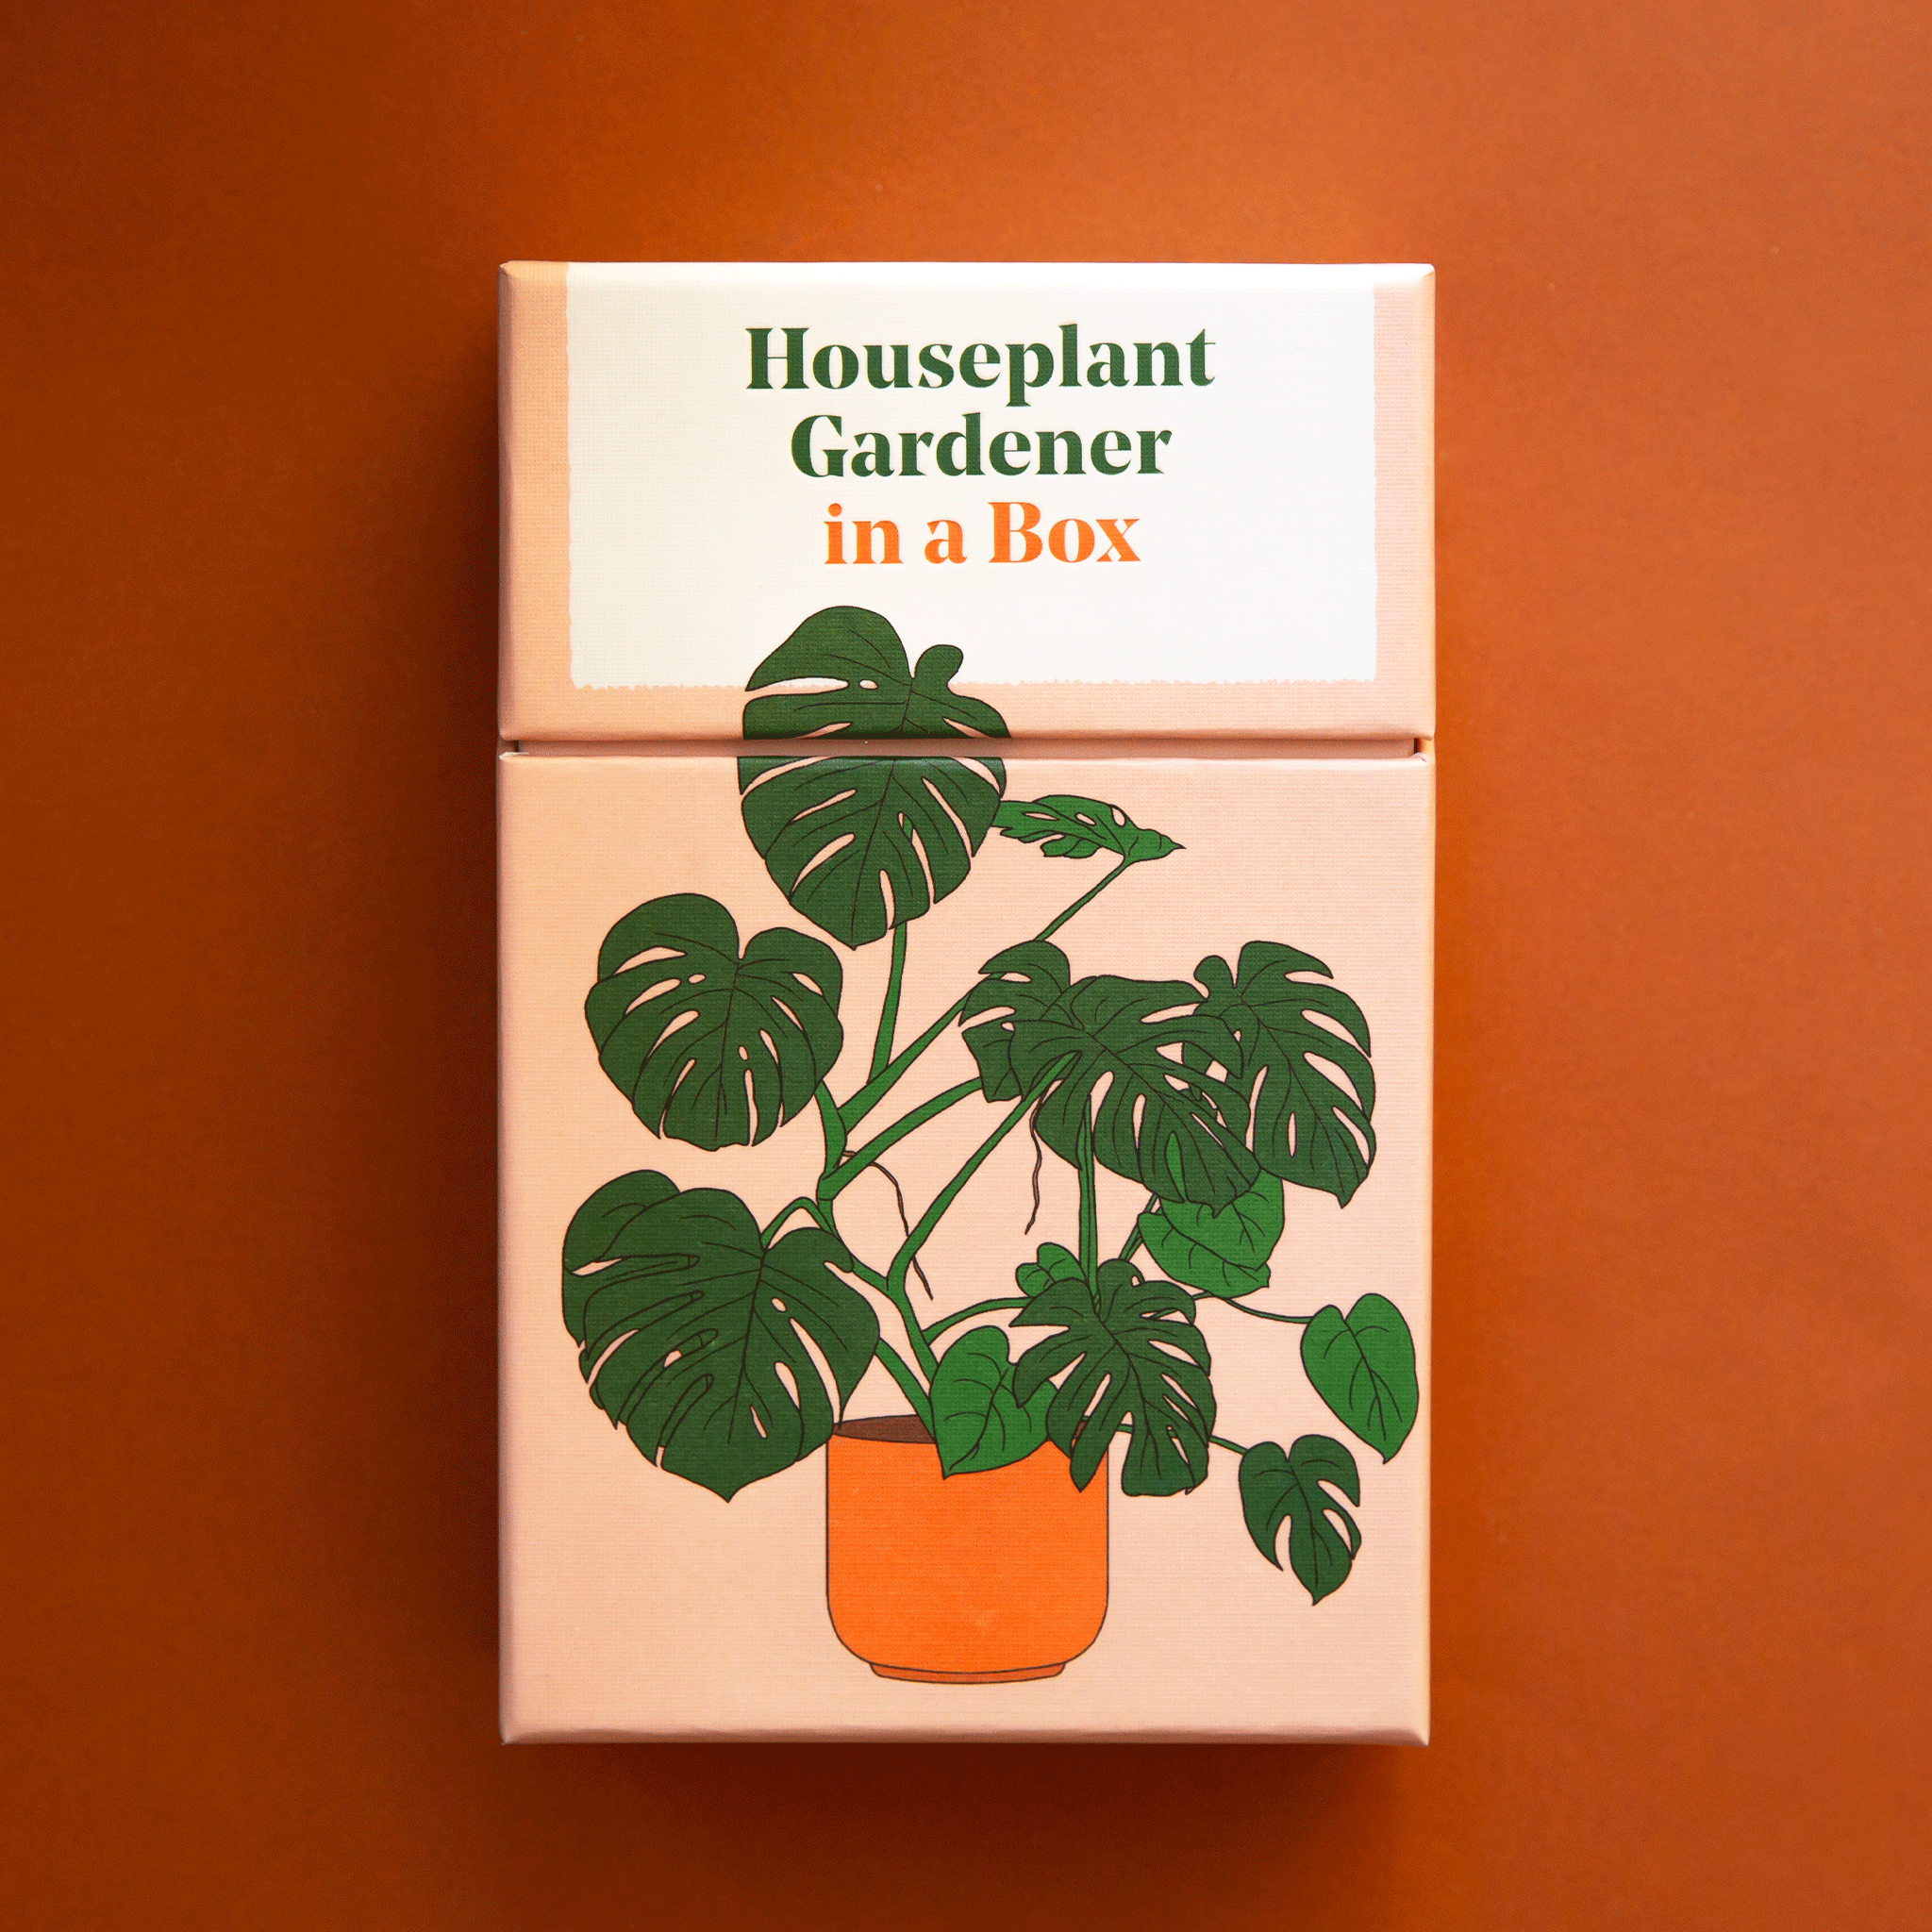 On an orange background is a tan box with an illustration of a split leaf with text that reads, "Houseplant Gardener in a Box". 